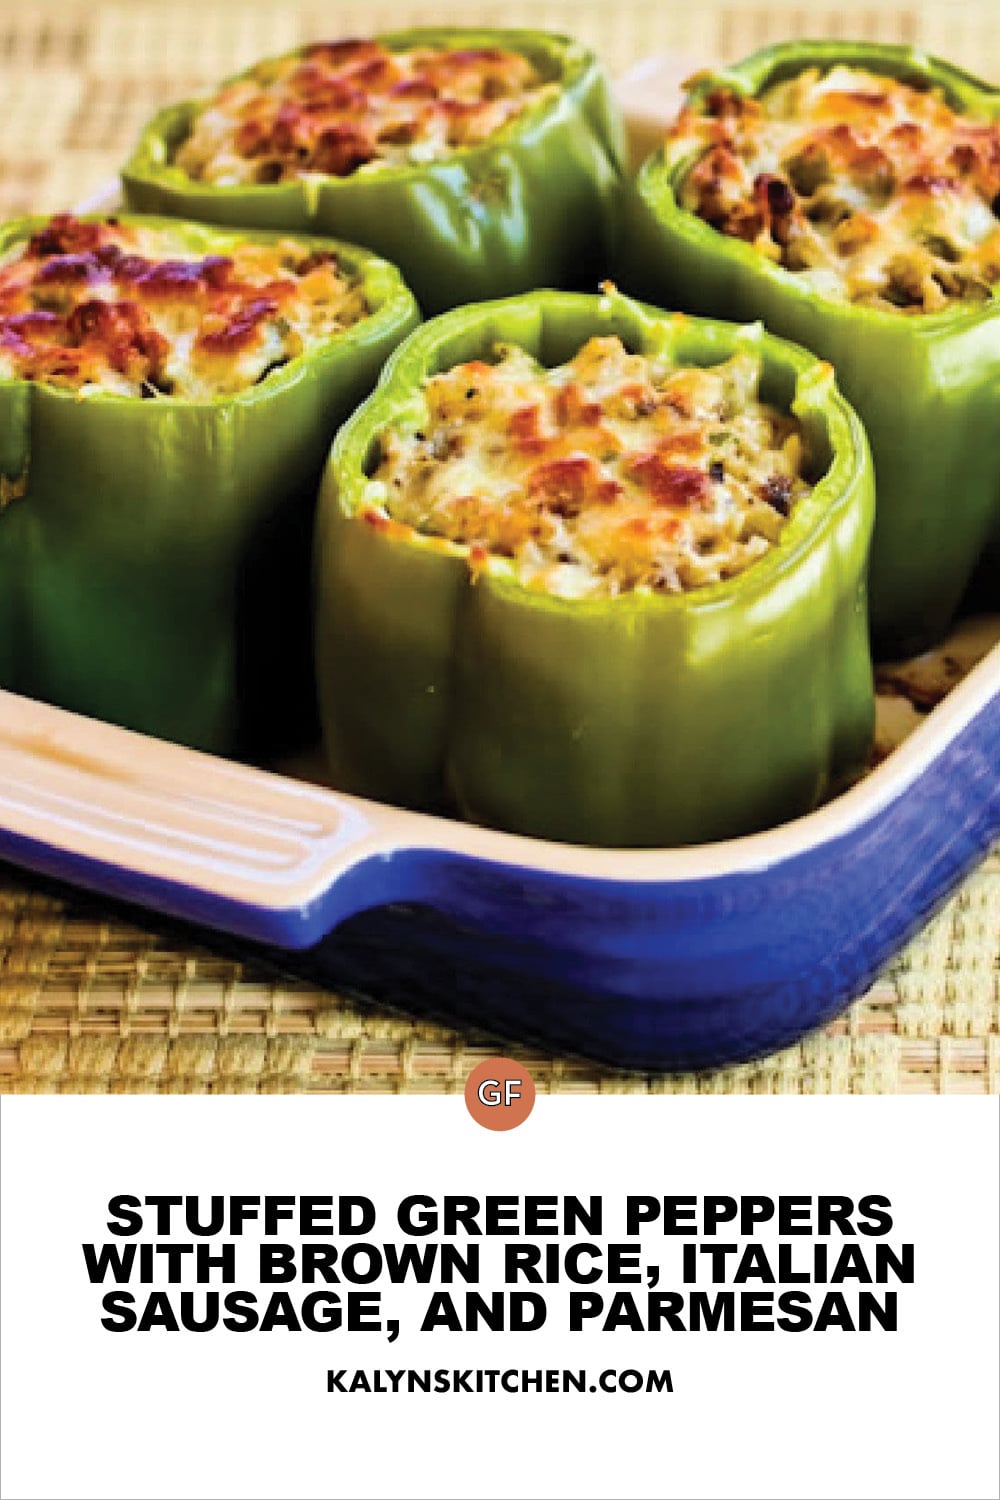 Pinterest image of Stuffed Green Peppers with Brown Rice, Italian Sausage, and Parmesan